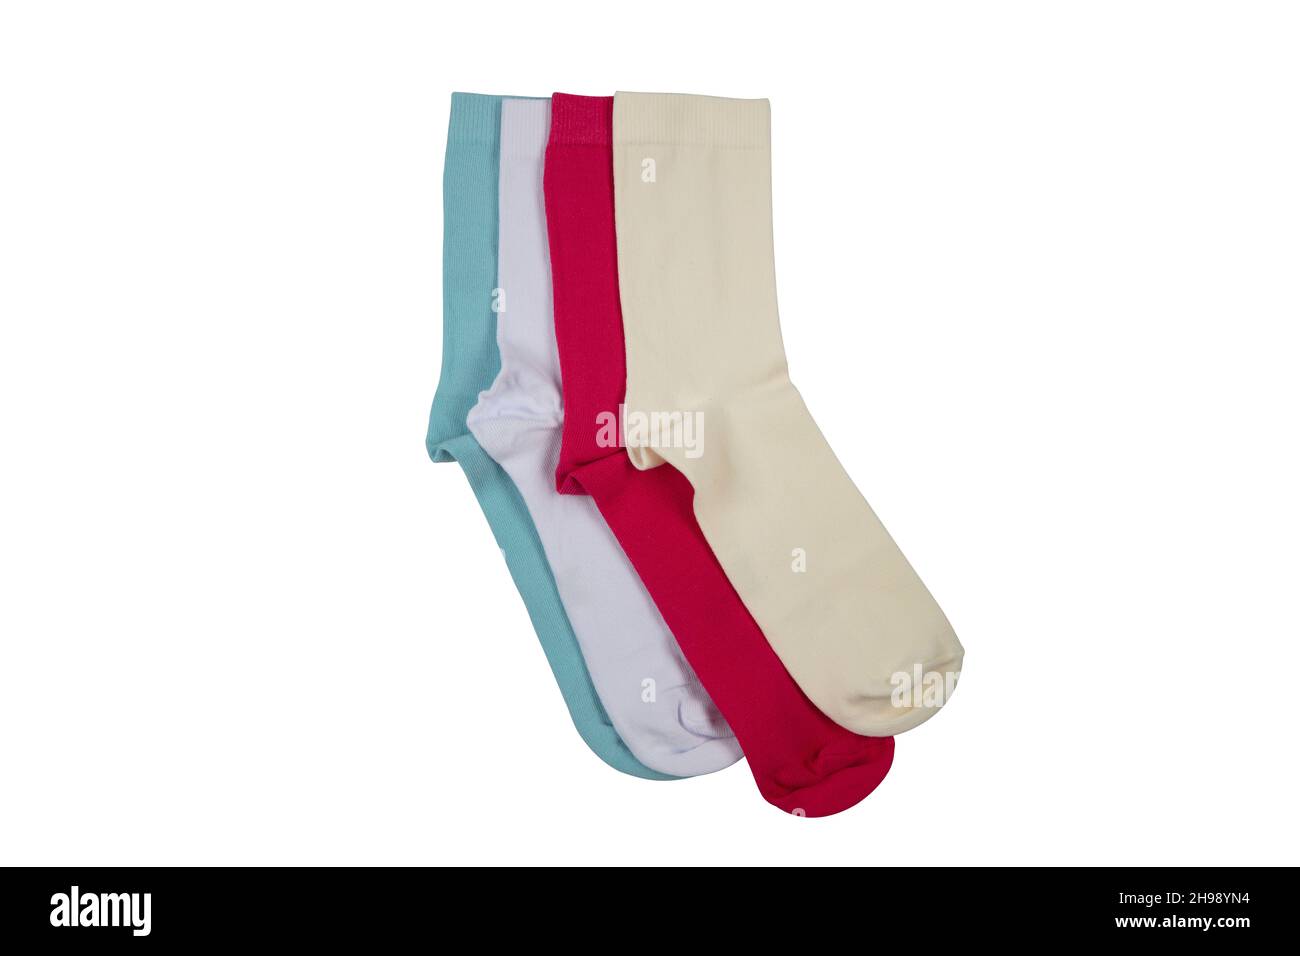 Flat socks.Long sock, elastic colorful fabric and striped Xmas warm ankle or sport feet cotton or wool comfort clothes. Socks are scattered on a brigh Stock Photo